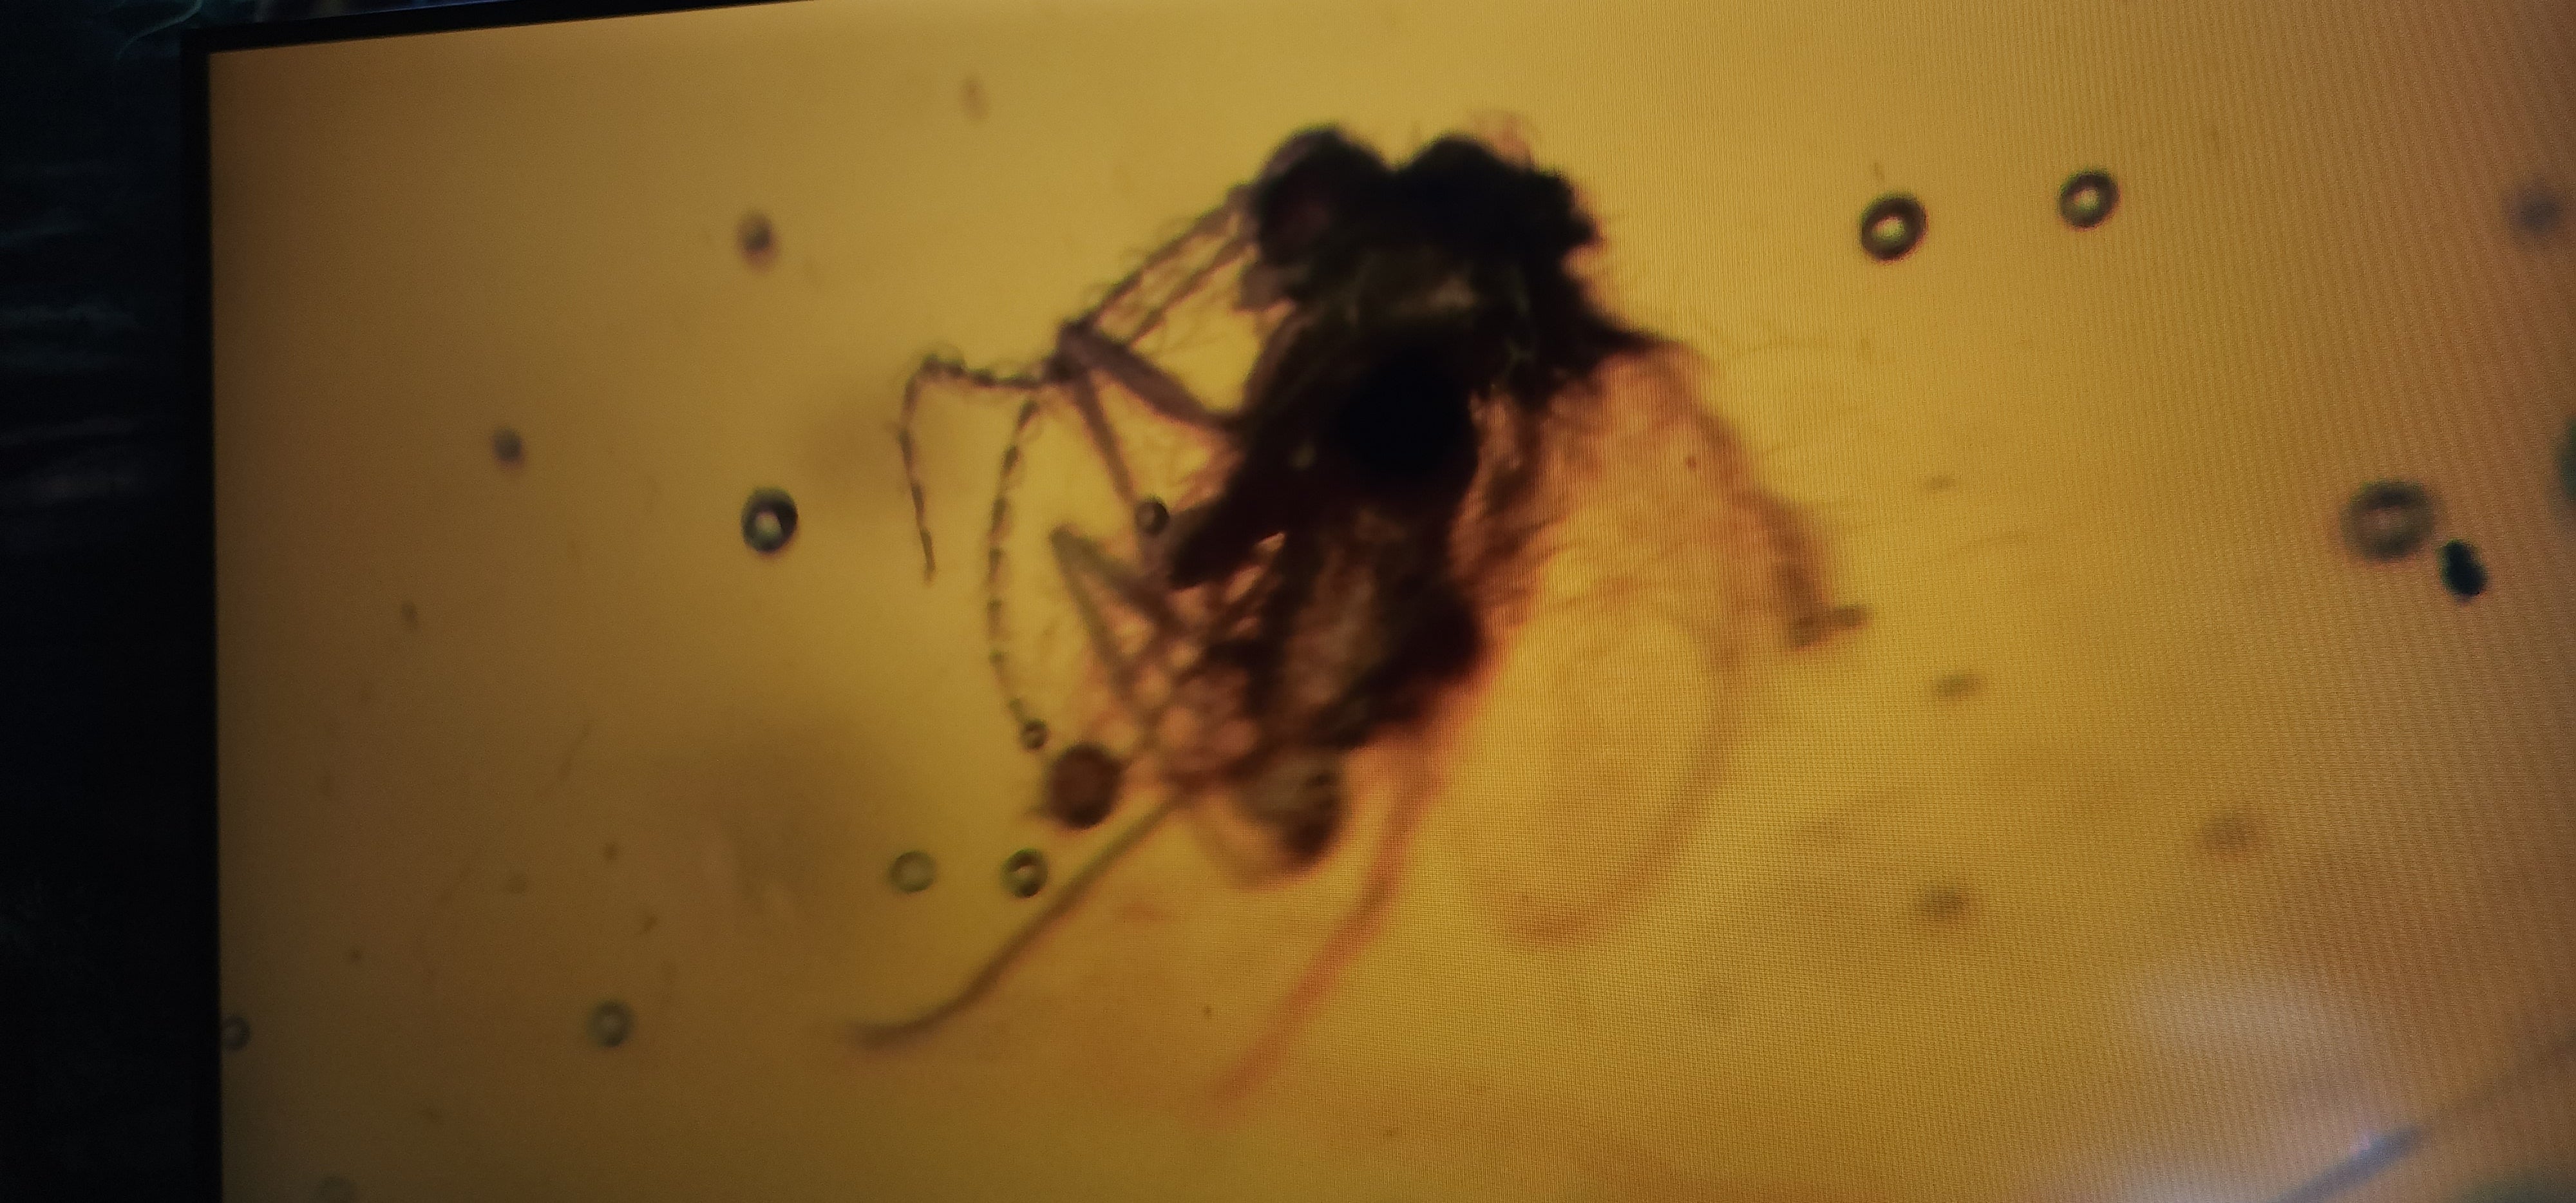 Dominican Amber Mosquito - Mycephalid swarm with bubbles